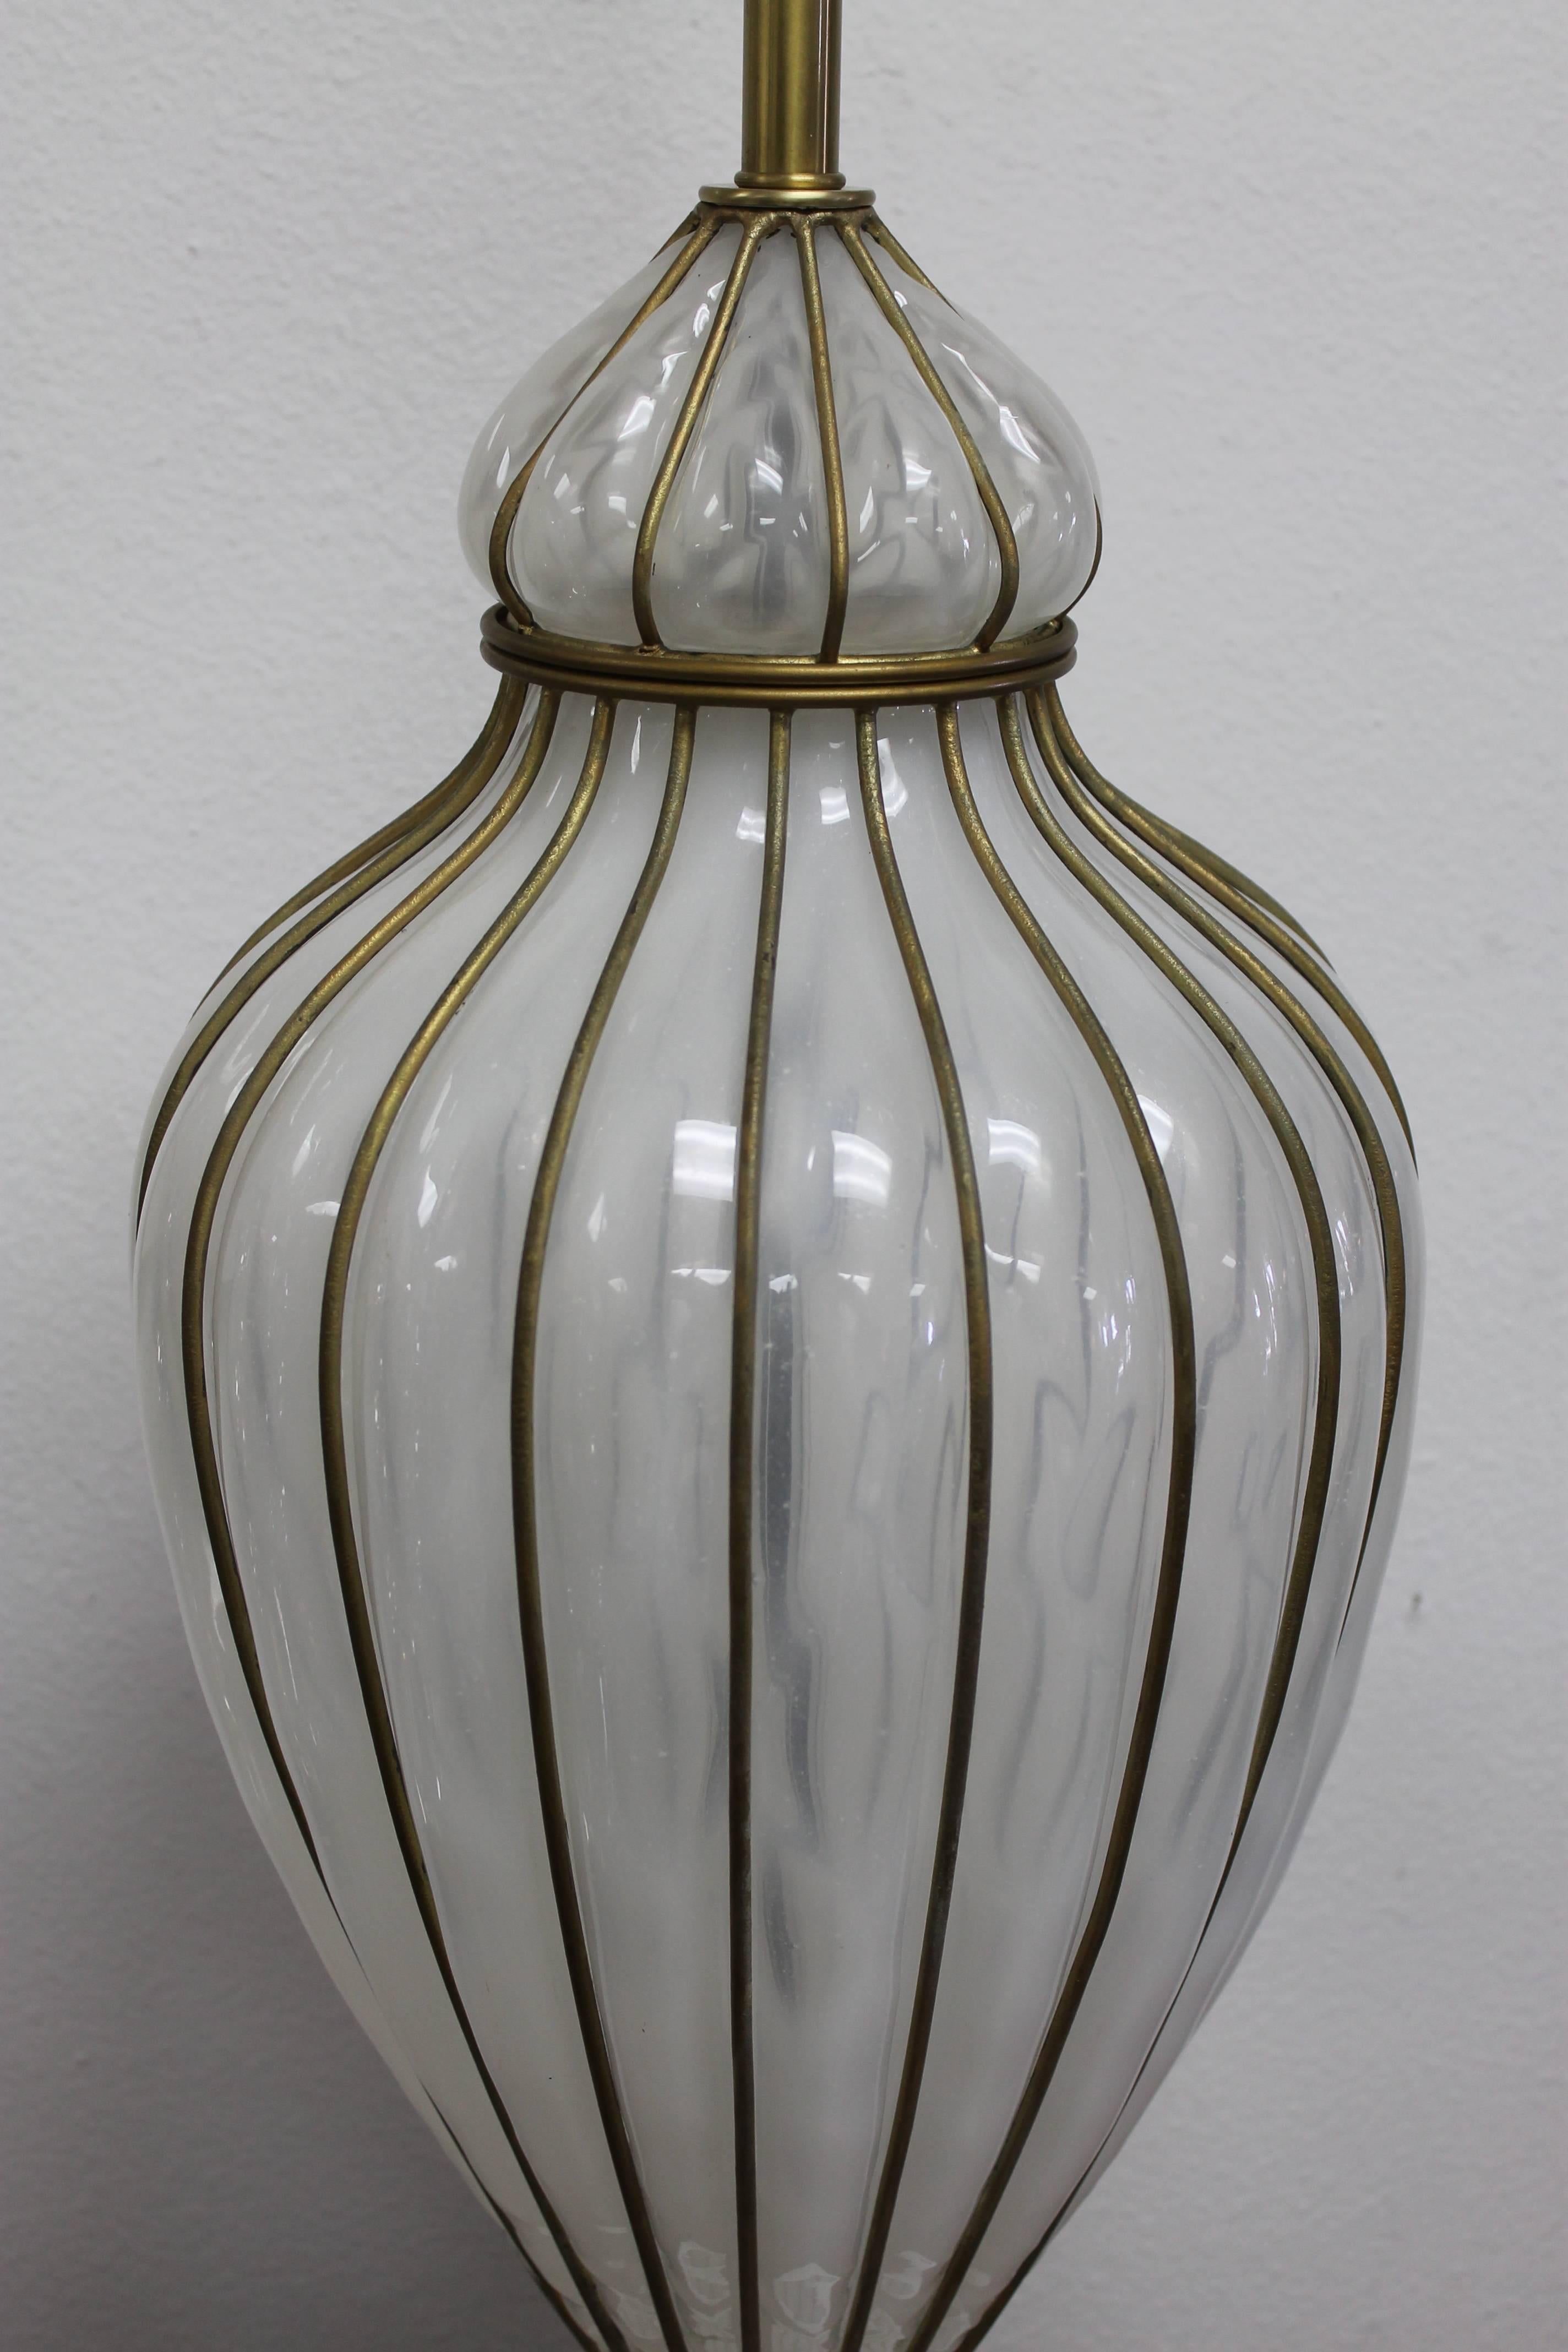 Beautiful Venetian glass lamp by the MARBRO lamp company.   Lamp has the MARBRO label stating it's Venetian Glass.  Base has been painted white and has been professionally rewired.  The glass portion is 24" high and 11" diameter.    Brass